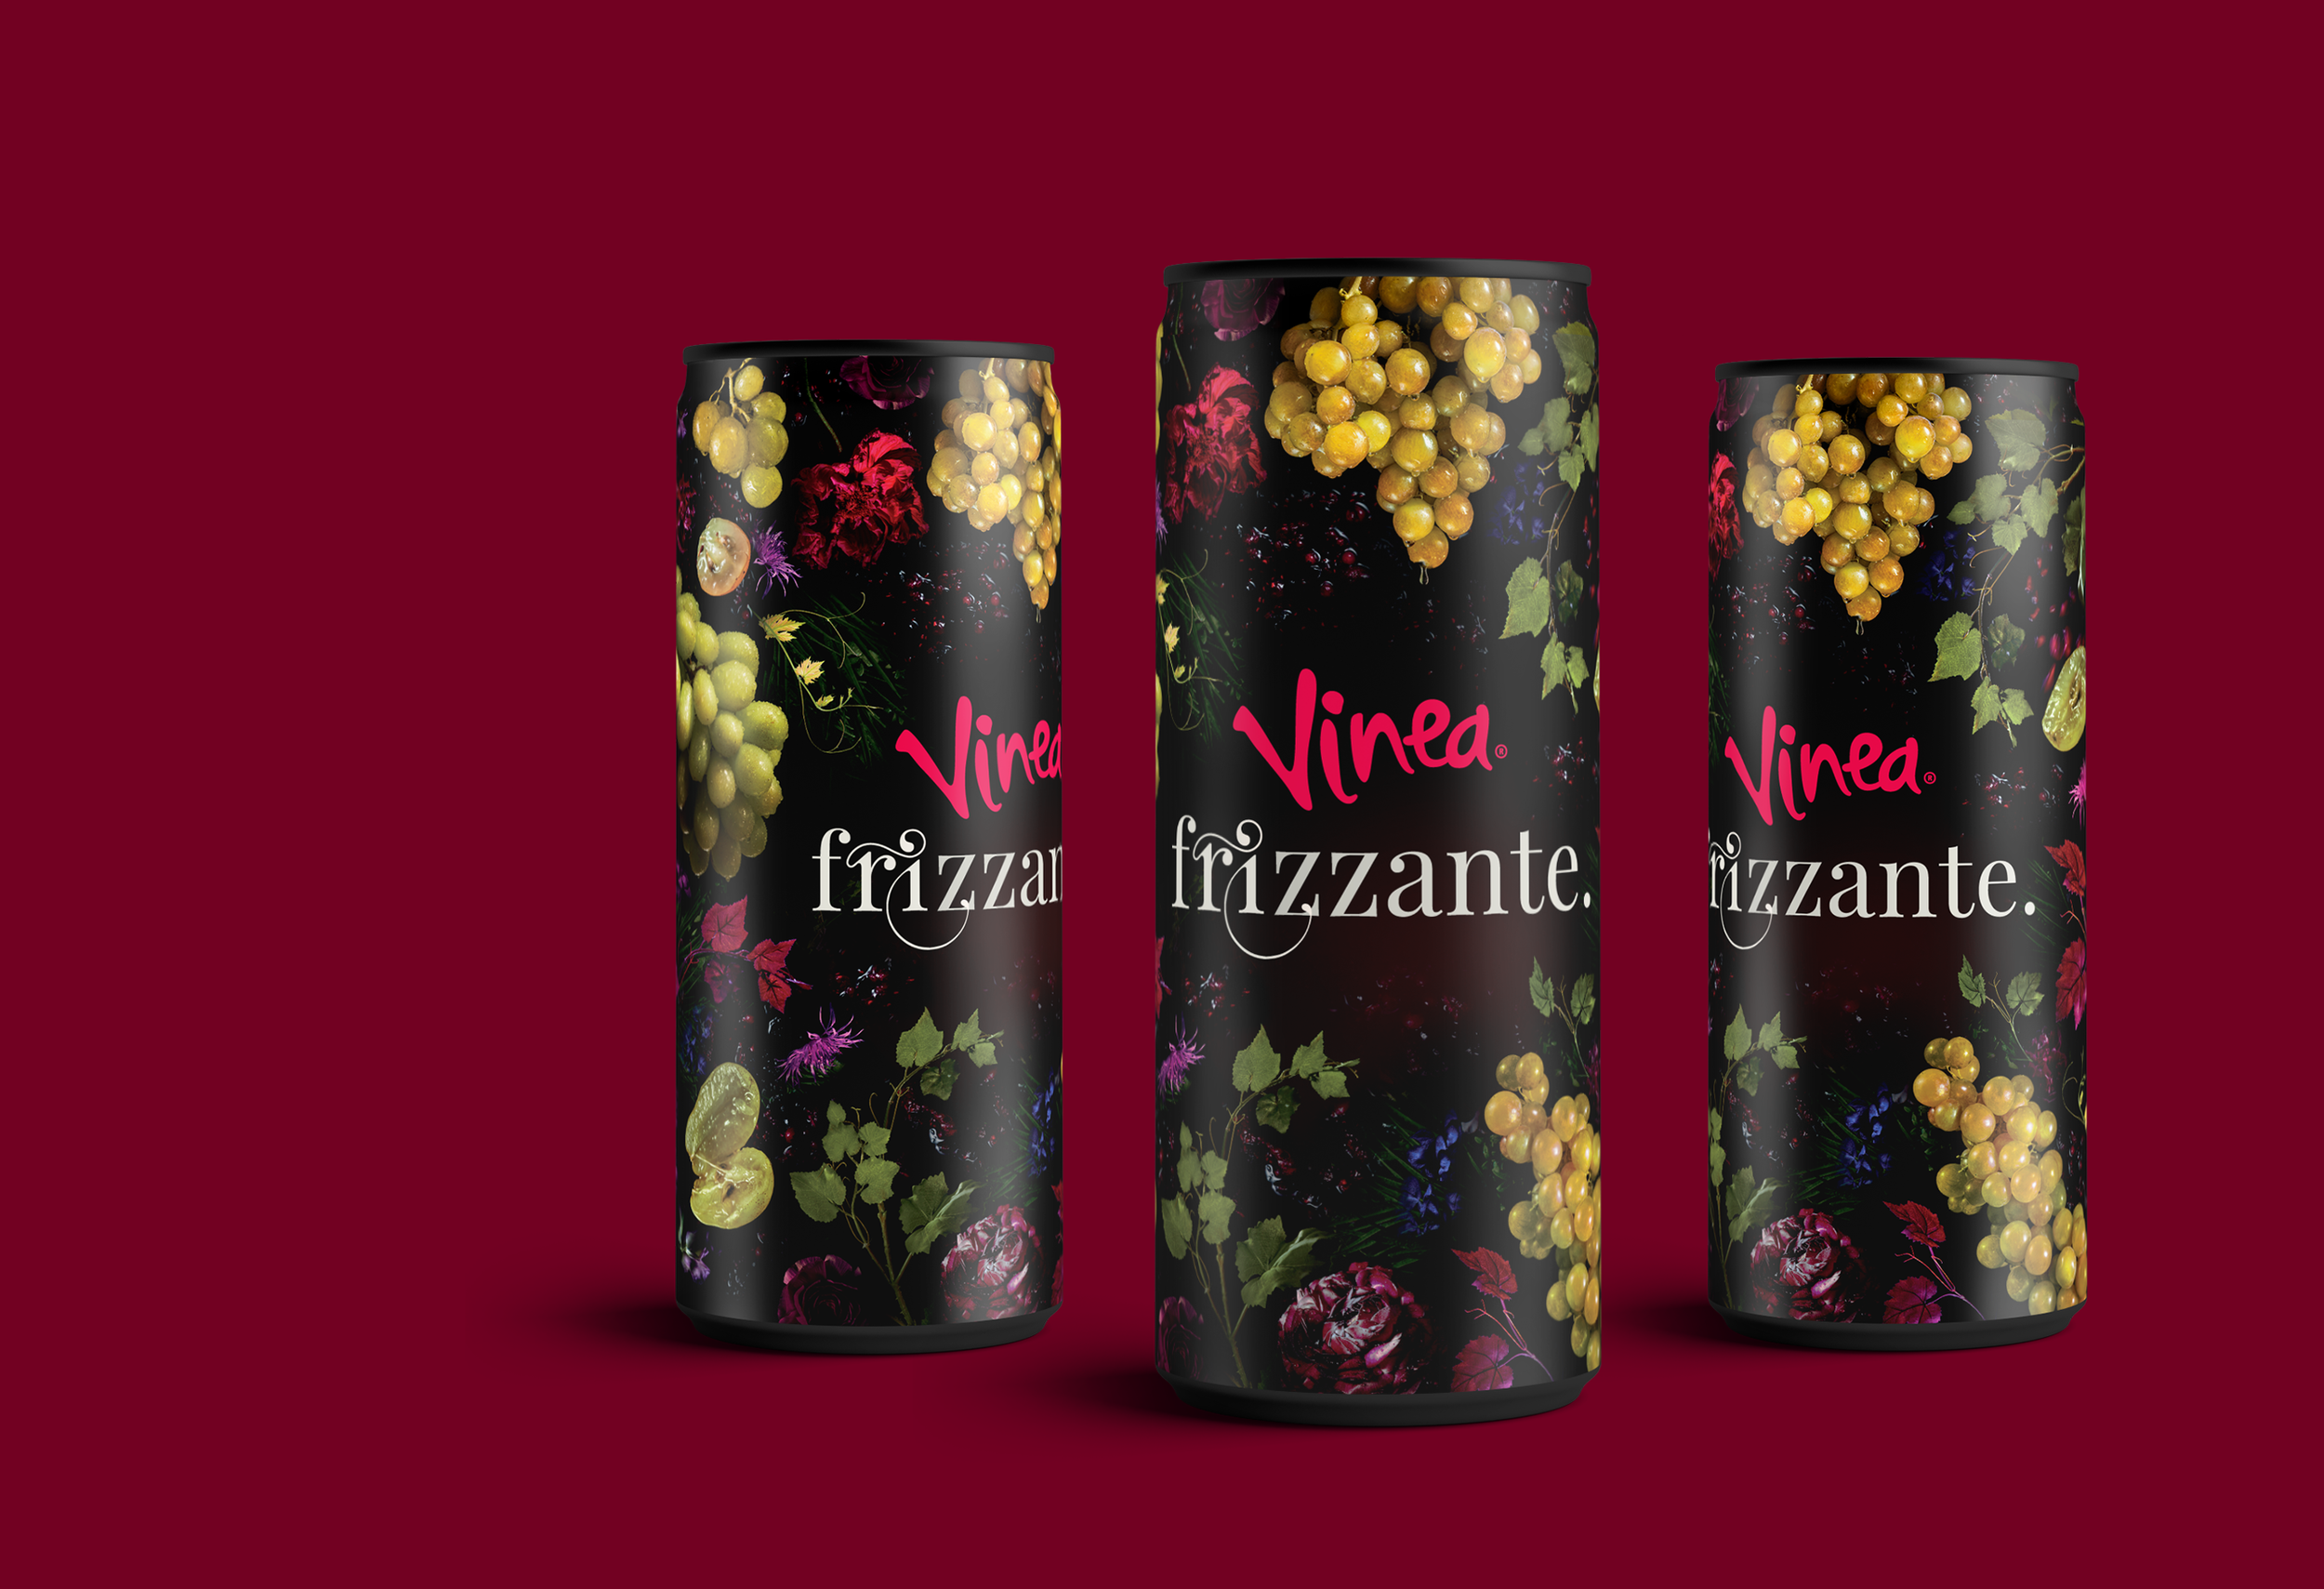 Complete Brand Design and Campaign for Sparkling Lemonade from Grapes